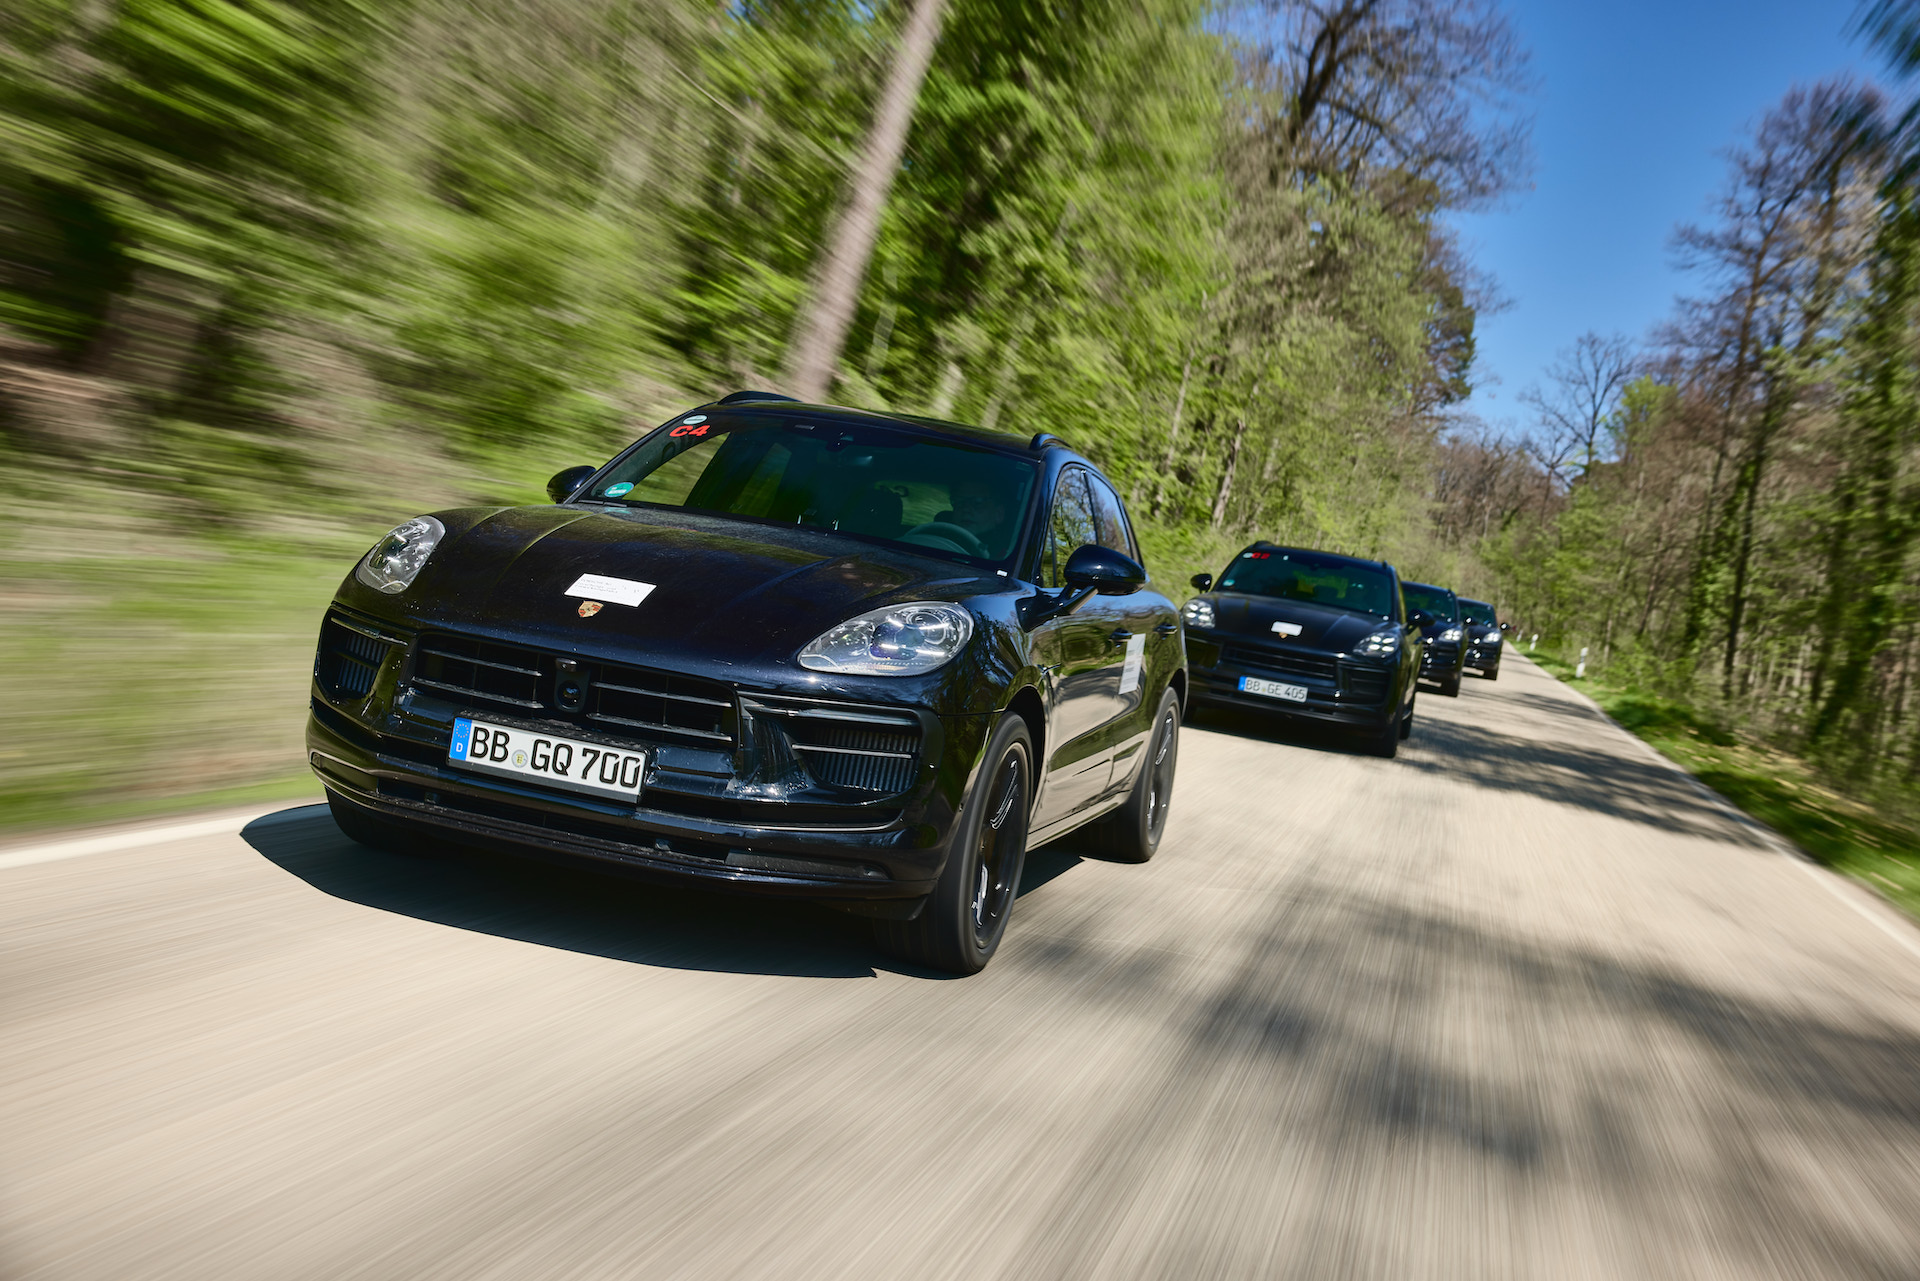 2022 Porsche Macan S First Drive Review: More Power to the People